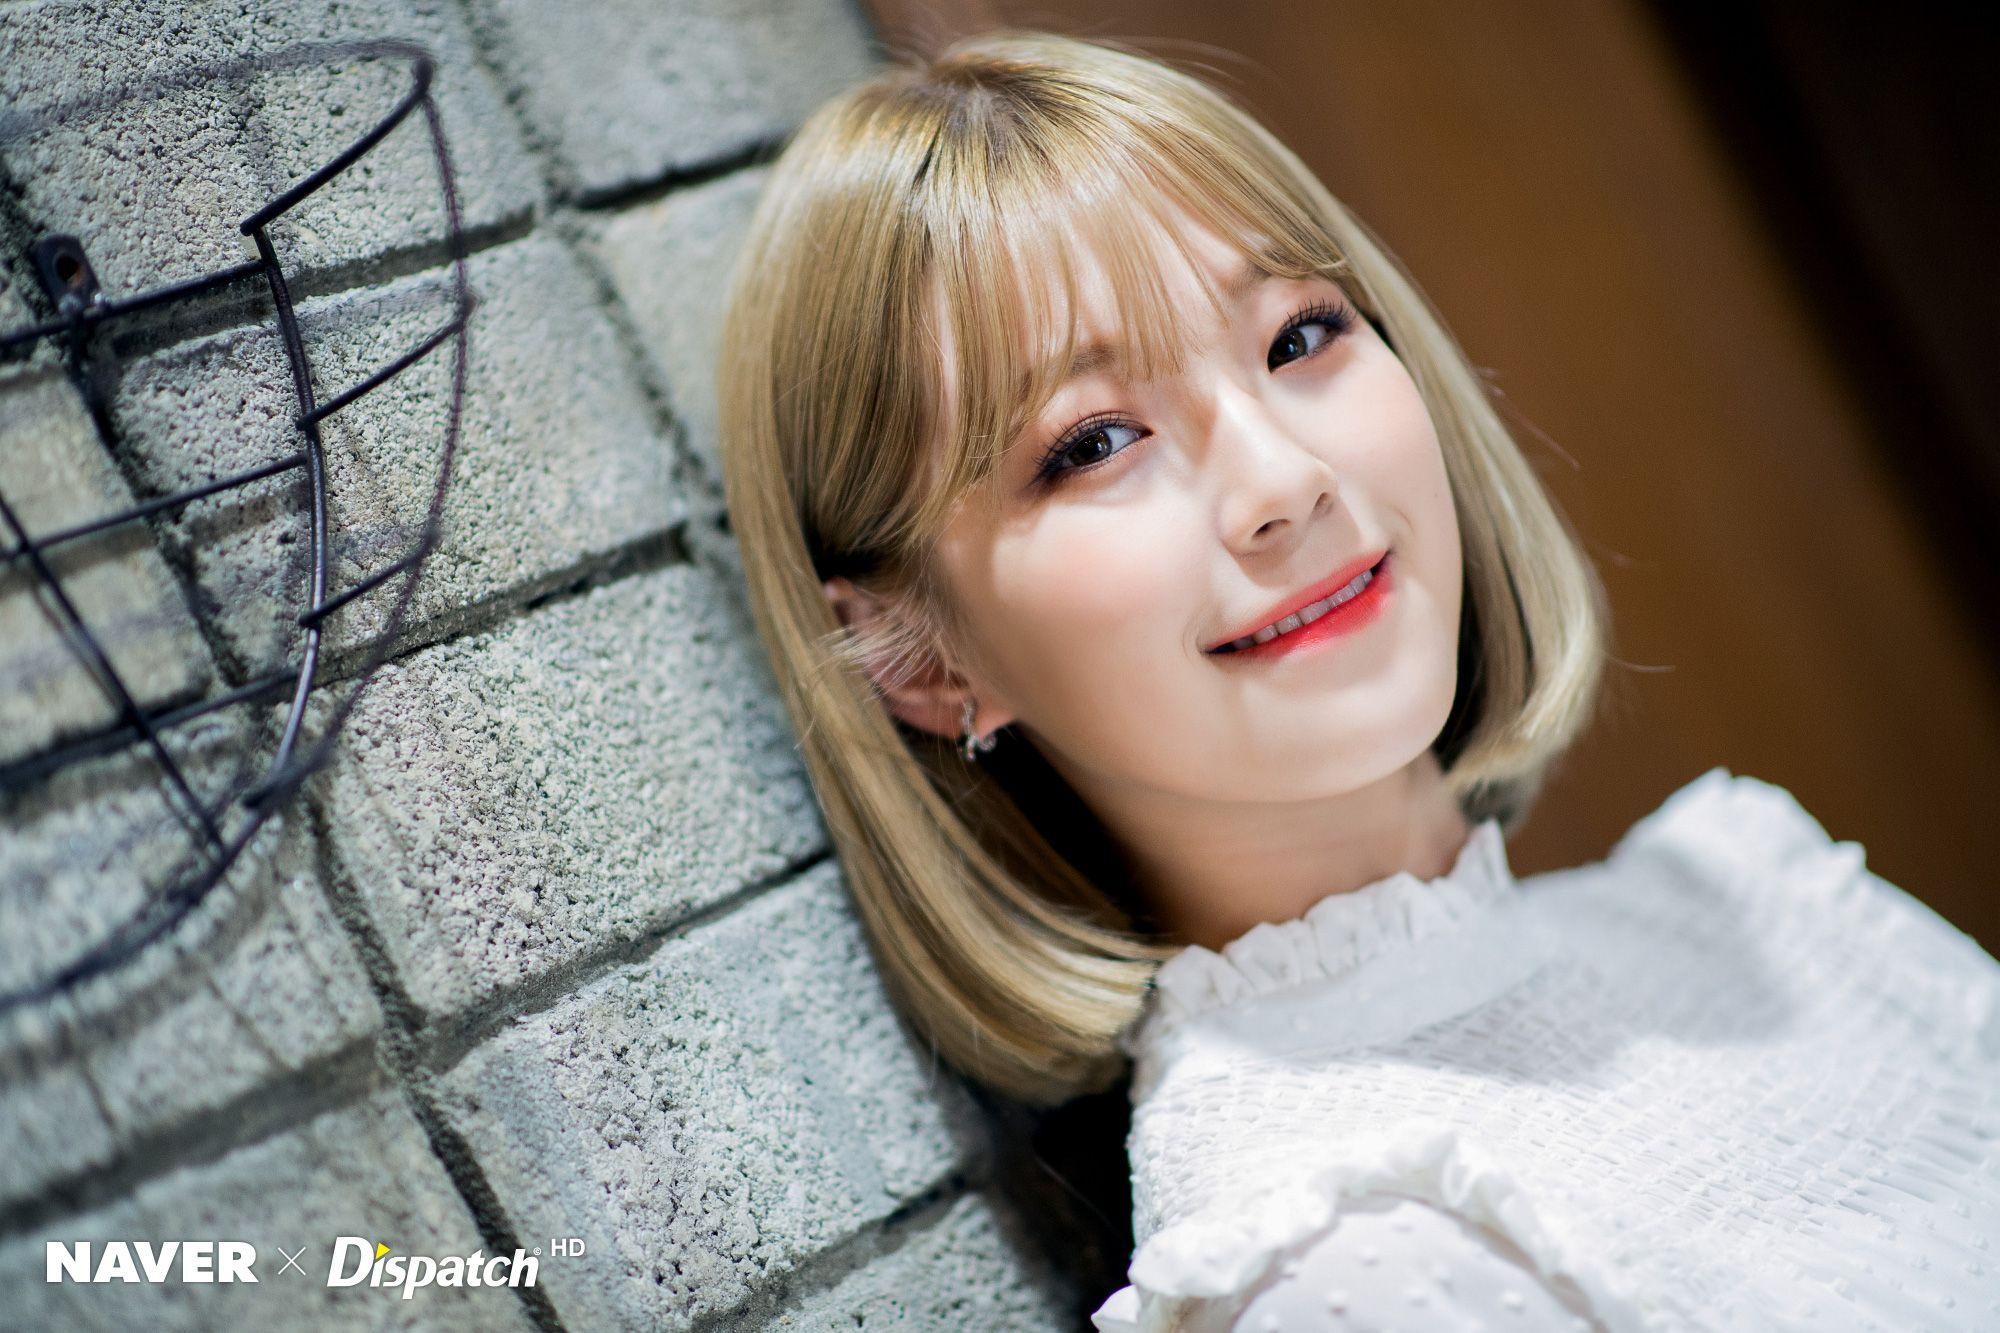 fromis_9 Baek Jiheon Day Event by Naver x Dispatch